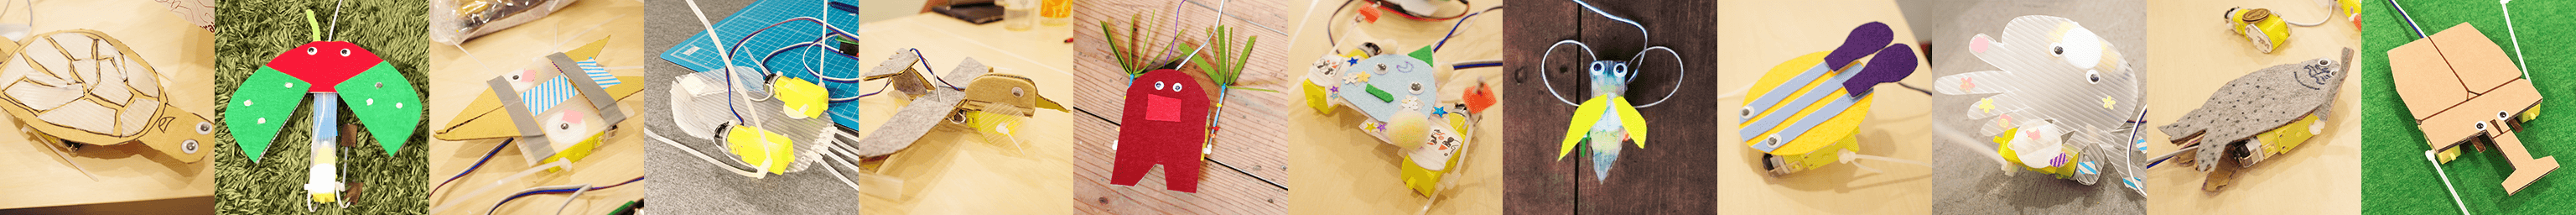 Example of create-a-critter robot kit